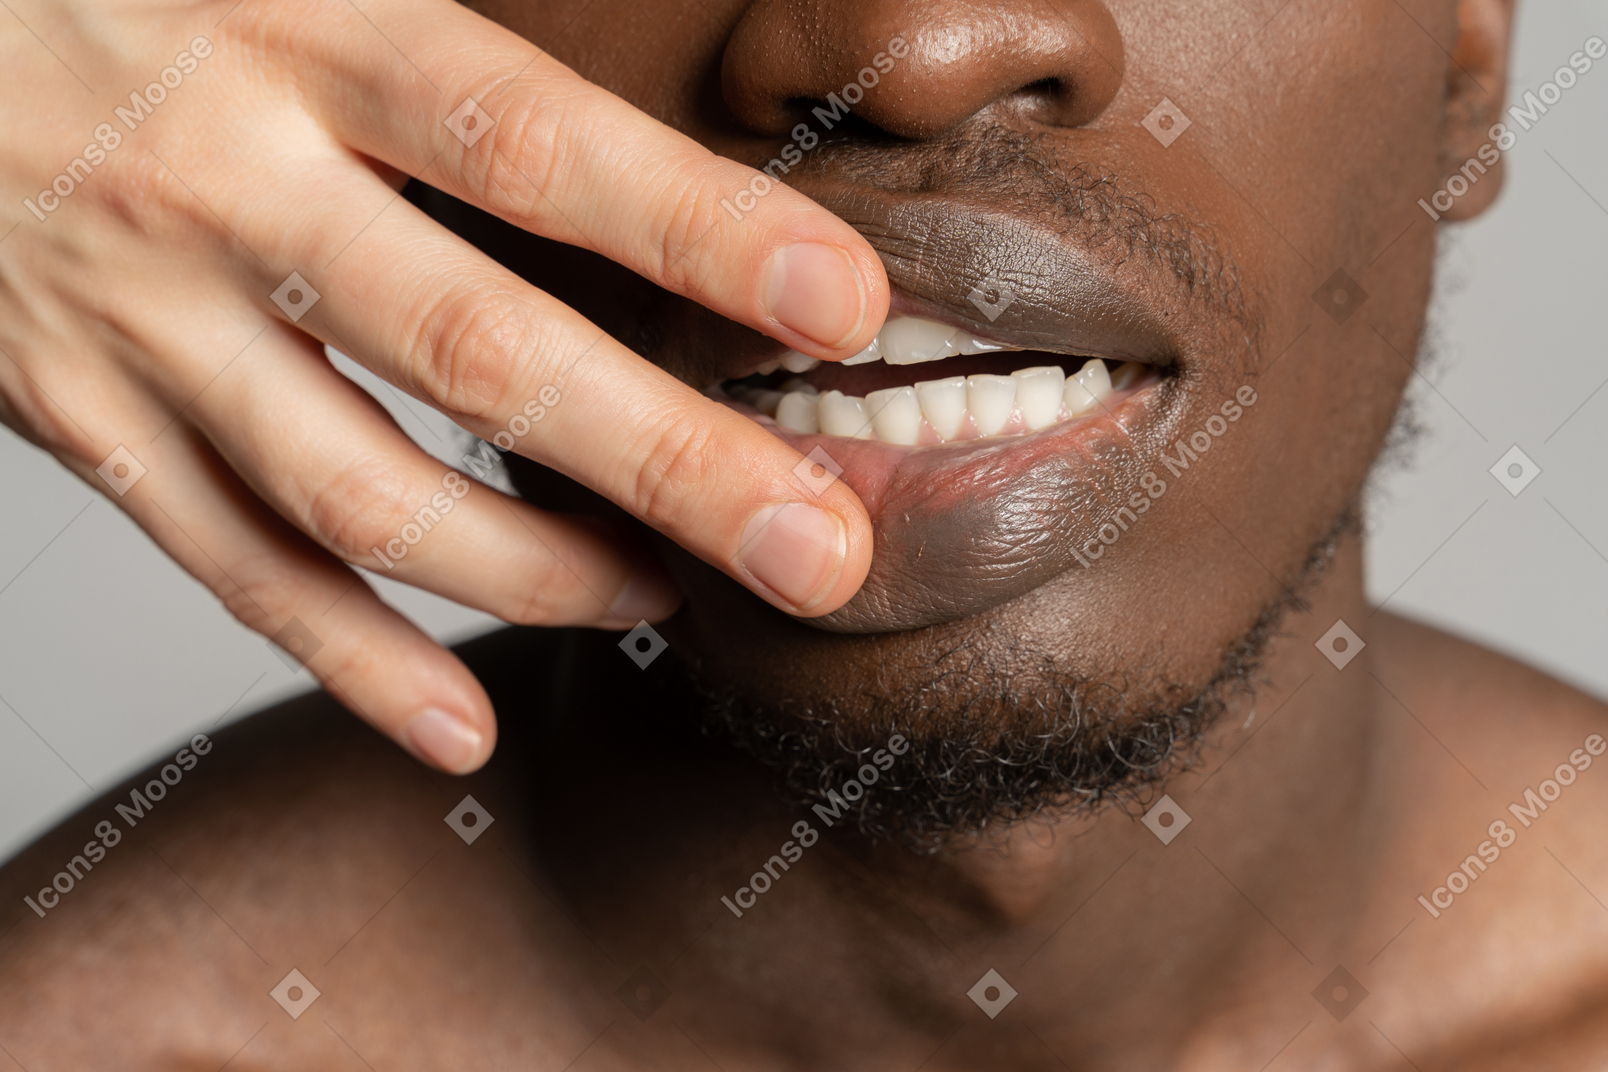 White fingers touching teeth of a black man